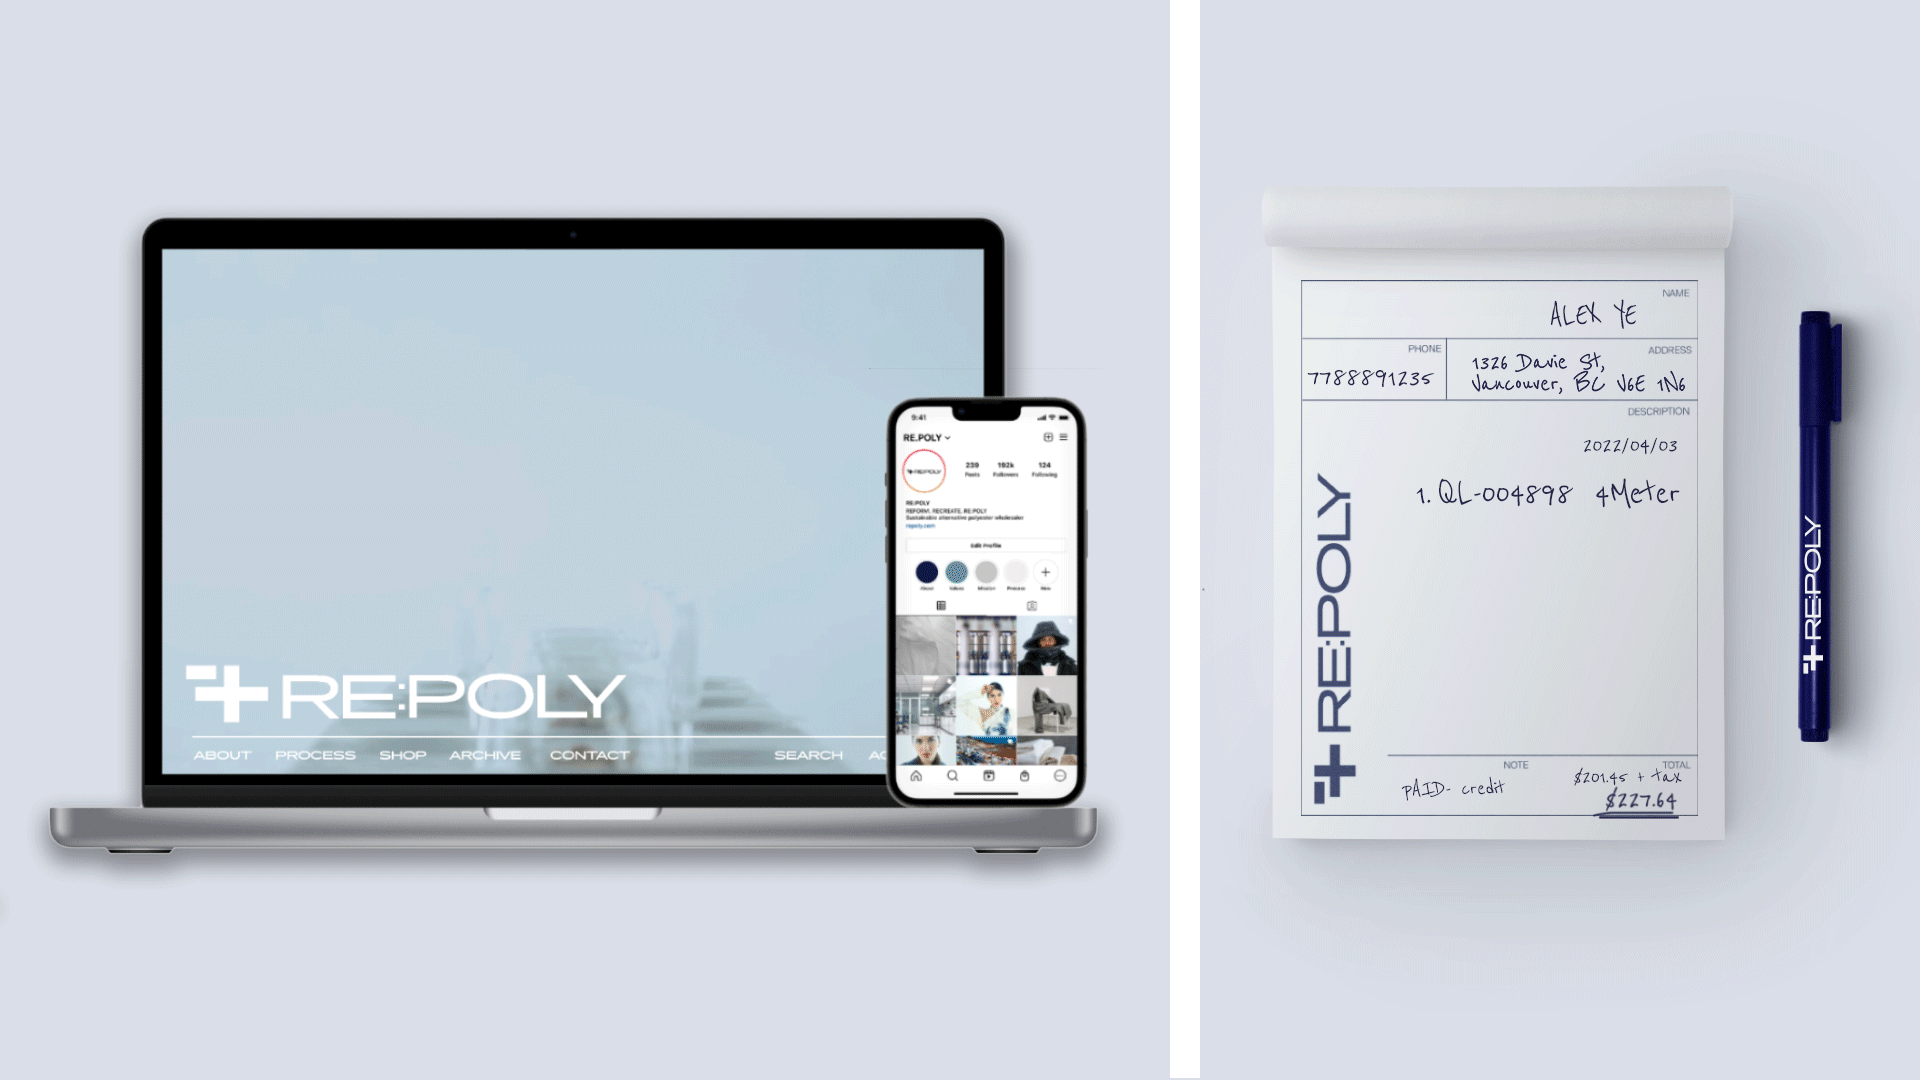 On the left is a GIF showing website and social media content. On the right is an image of a branded RE:POLY order form and pen.